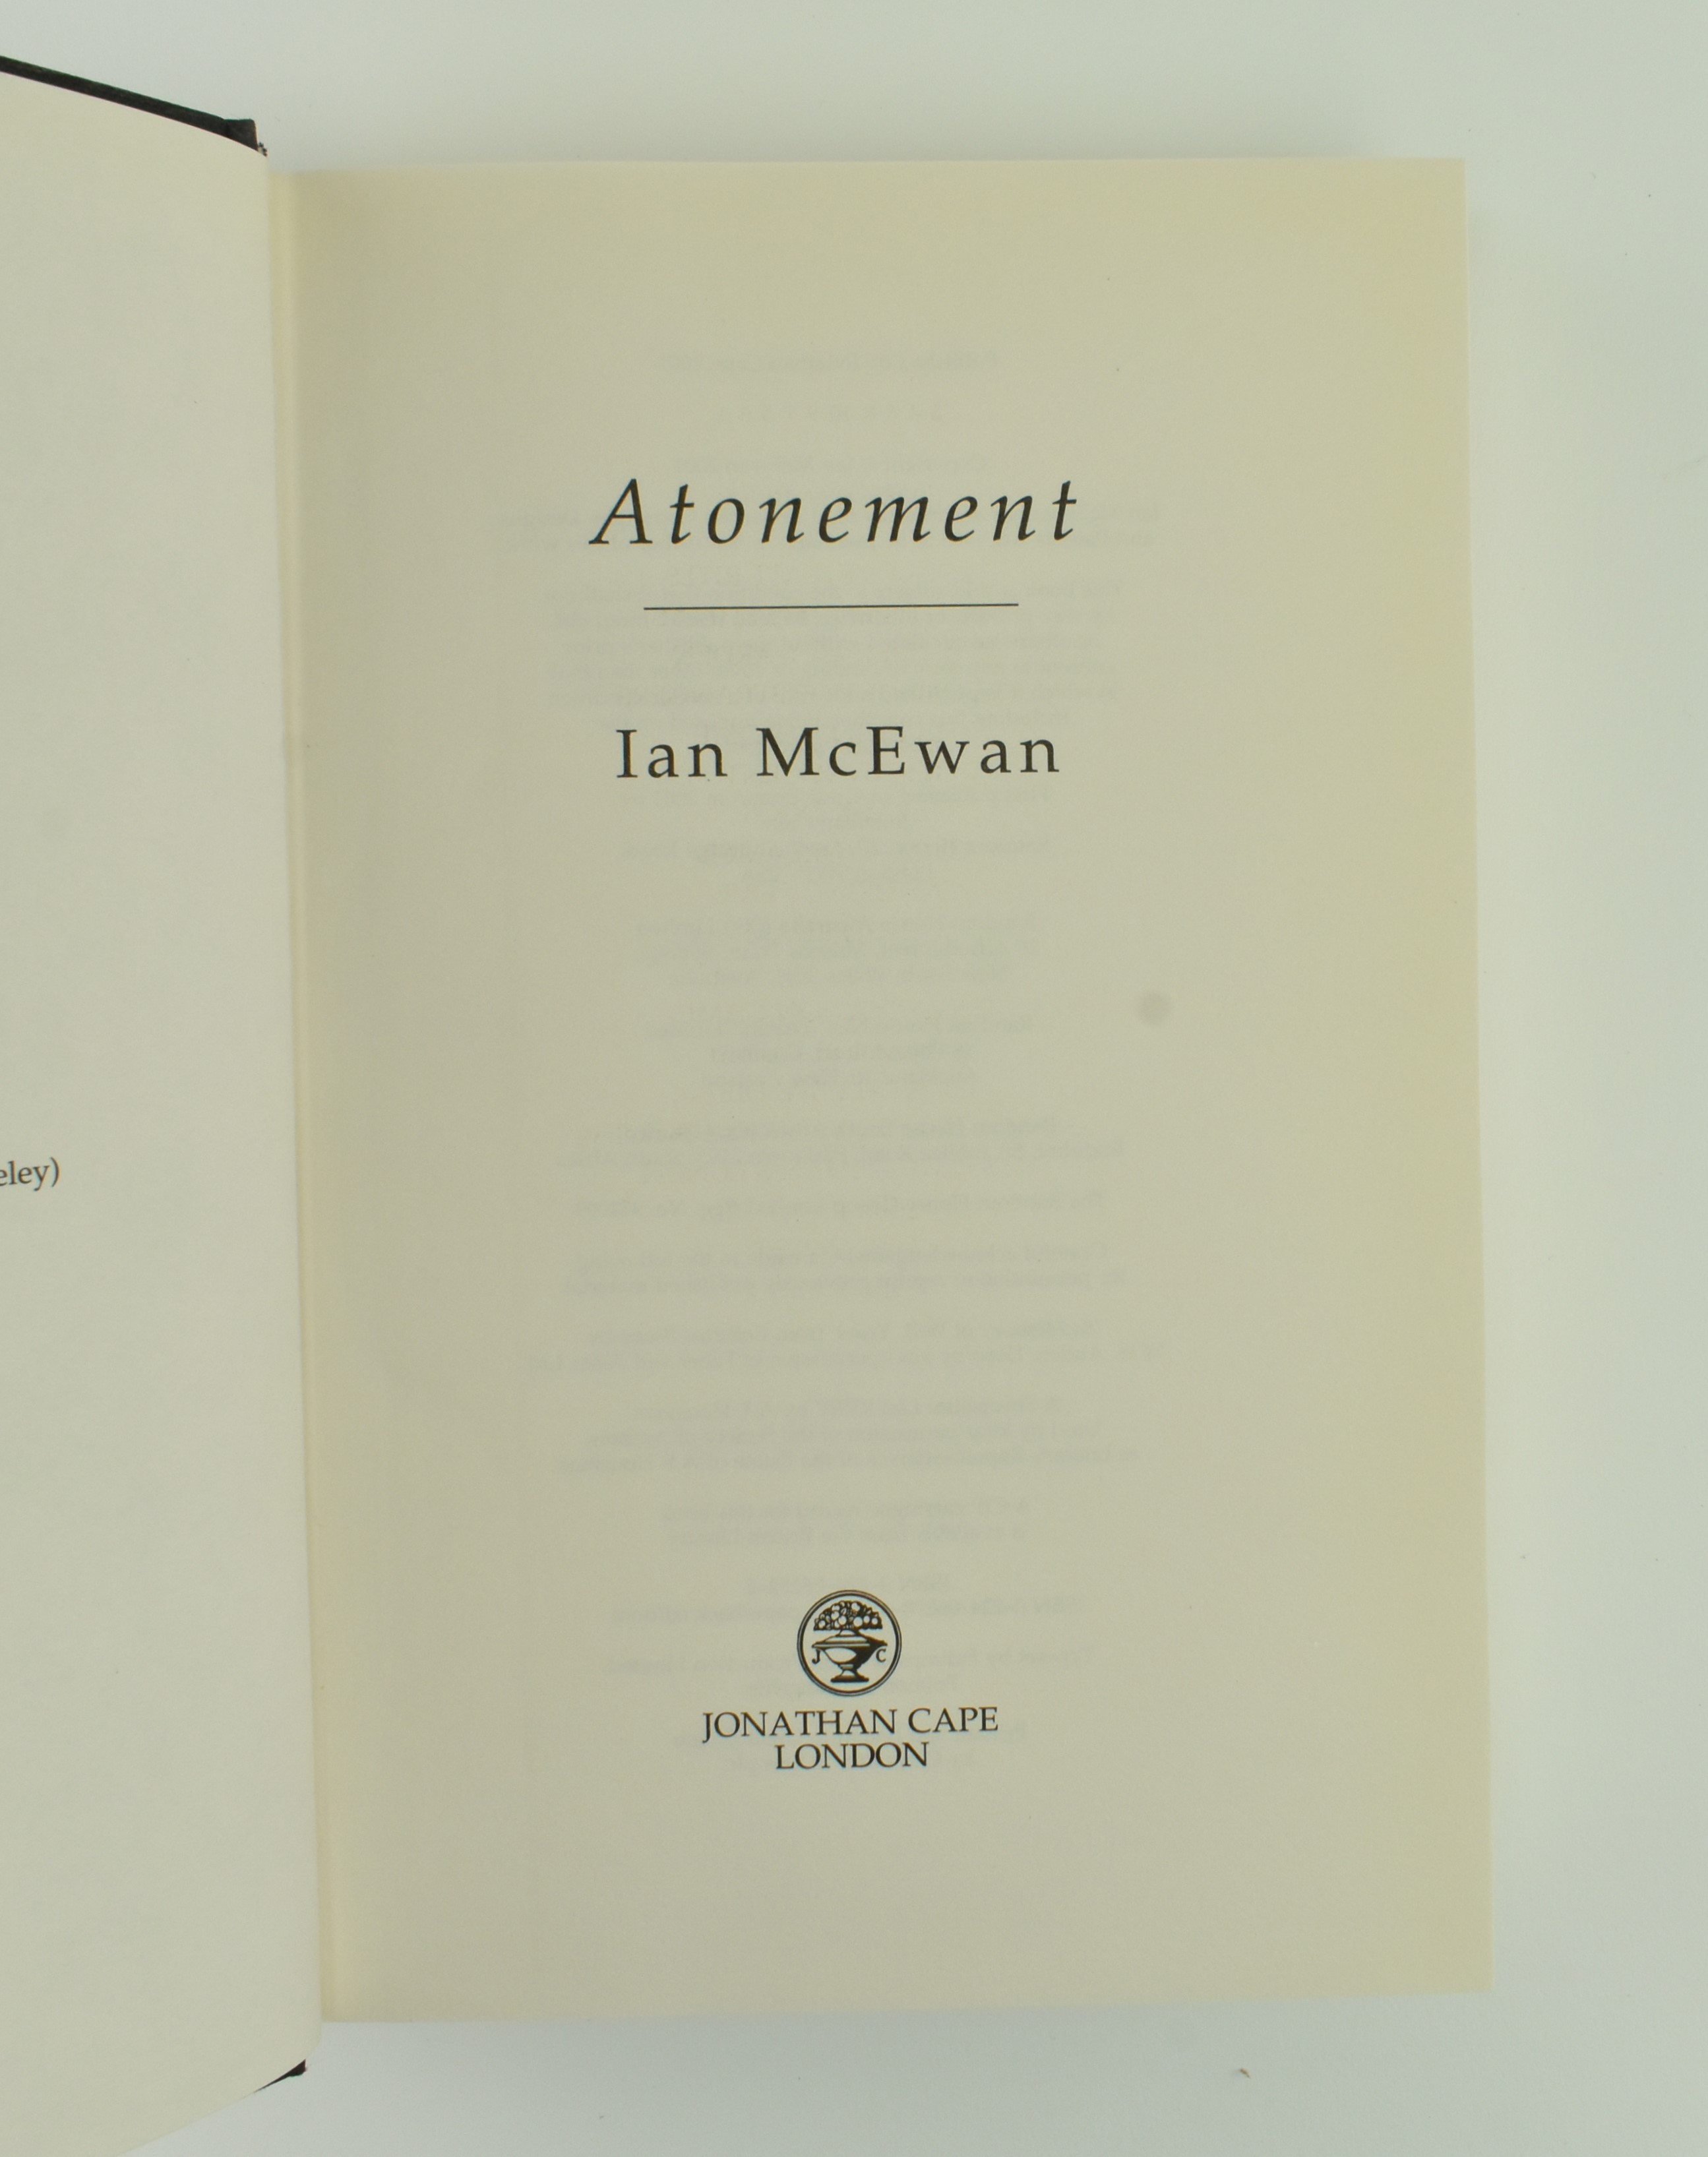 MODERN FIRST EDITIONS. COLLECTION OF MODERN FICTION WORKS - Image 11 of 12